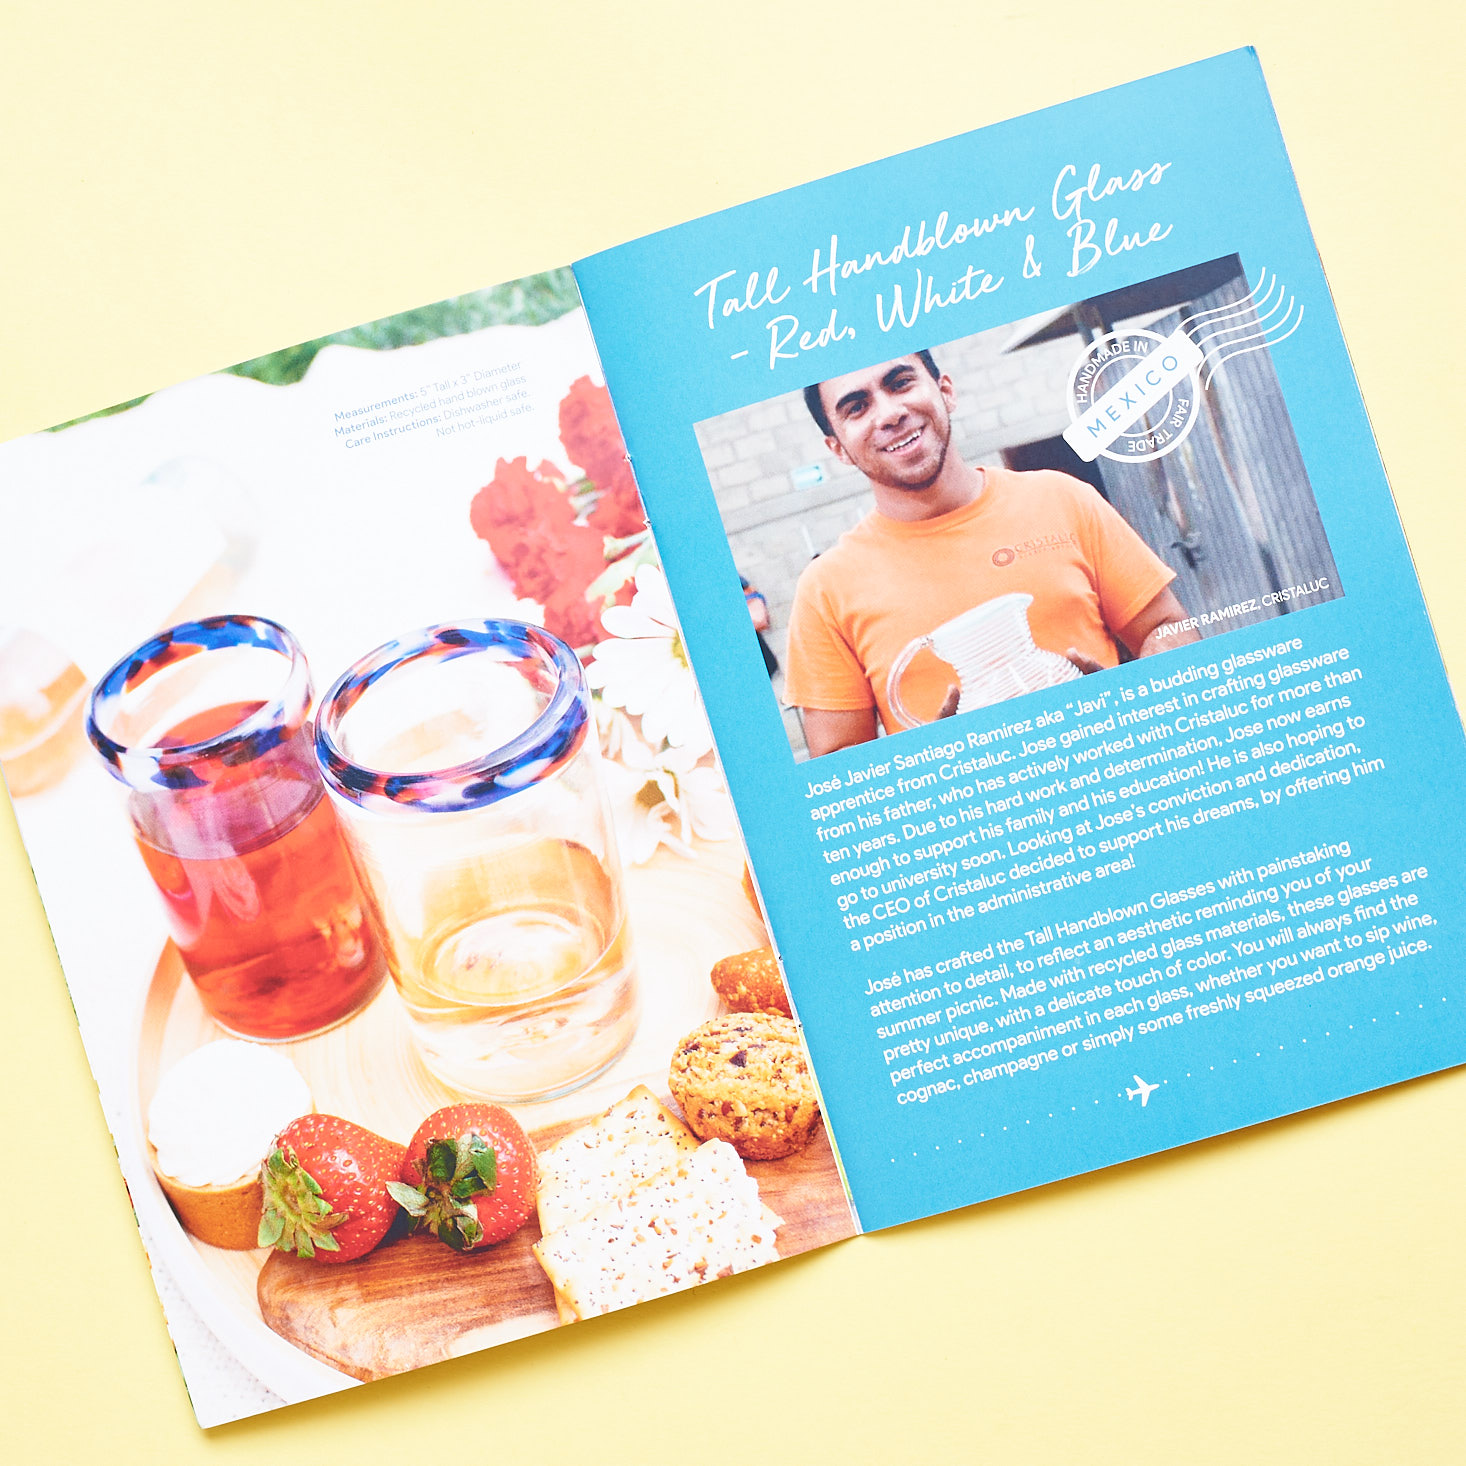 GlobeIn Picnic June 2019 artisan subscription box review booklet